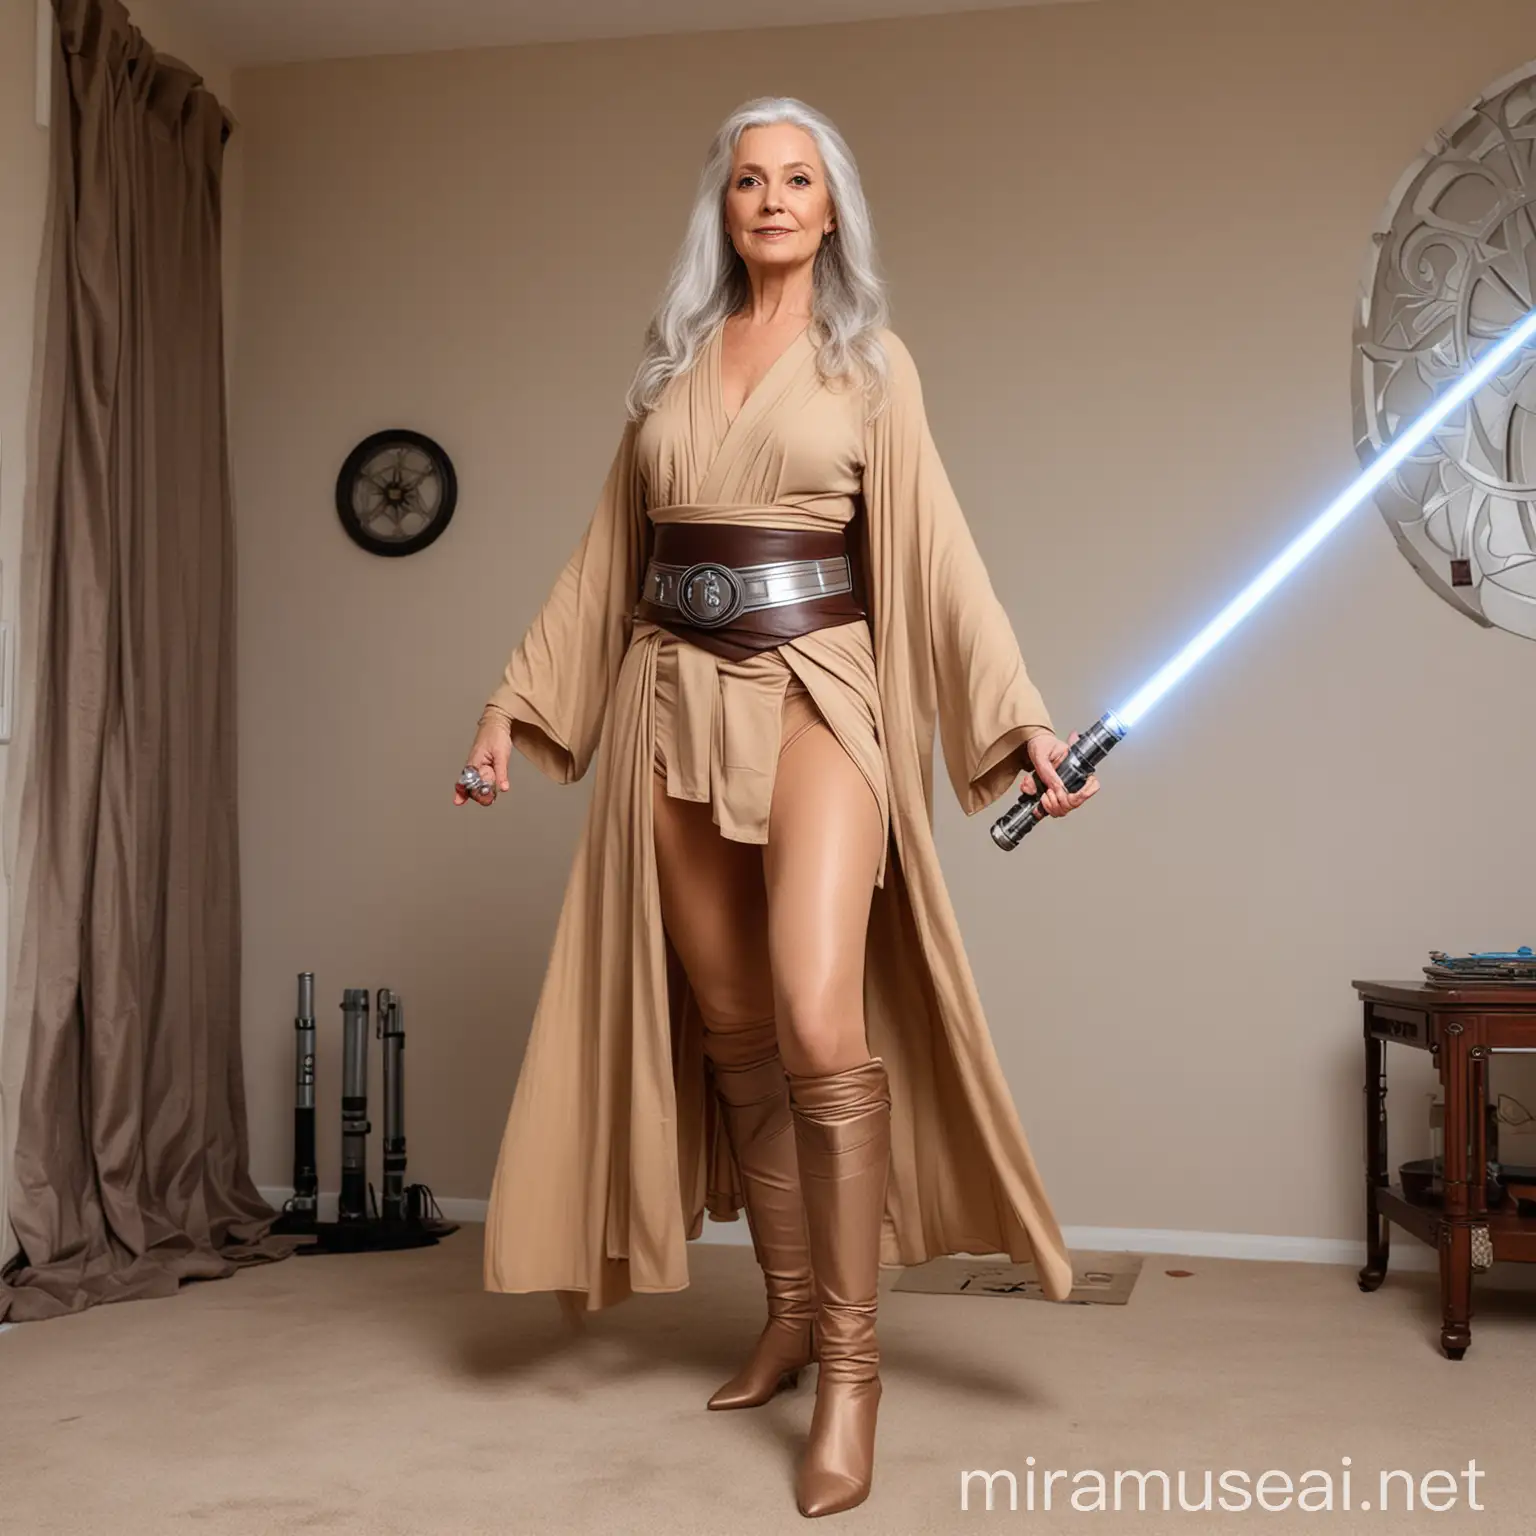 Elegant Mature Lady in Star Wars Jedi Robes with Lightsaber in Tatooine Home